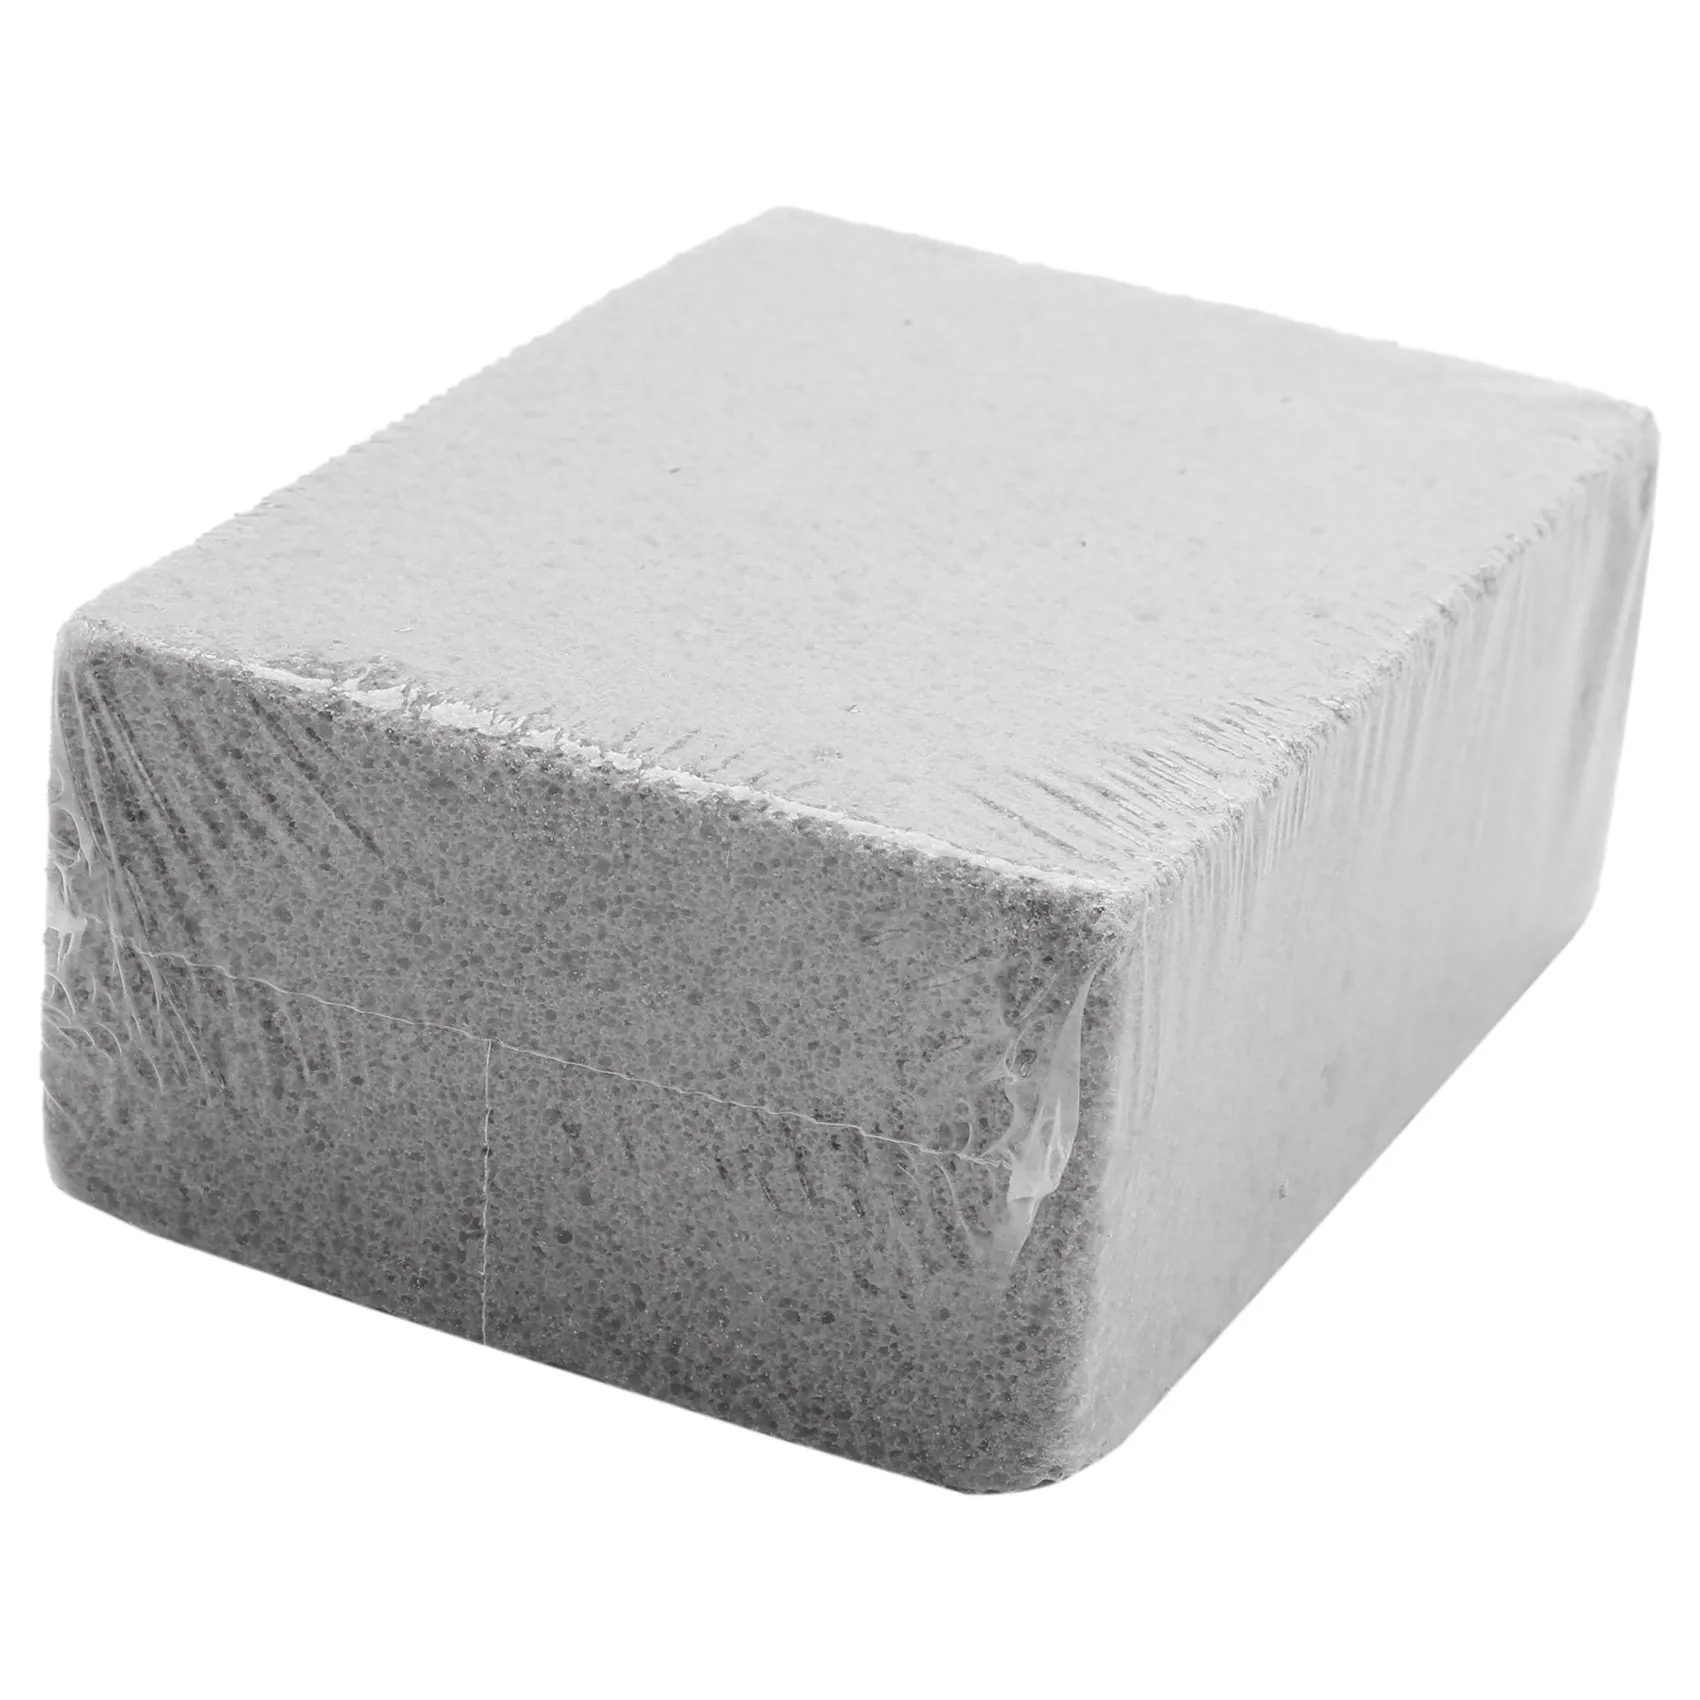 

4 Pack Grill Griddle Cleaning Brick Block,Kitchen Bathroom Cleaning Pumice Block, De-Scaling Cleaning Stone for Removing Stains